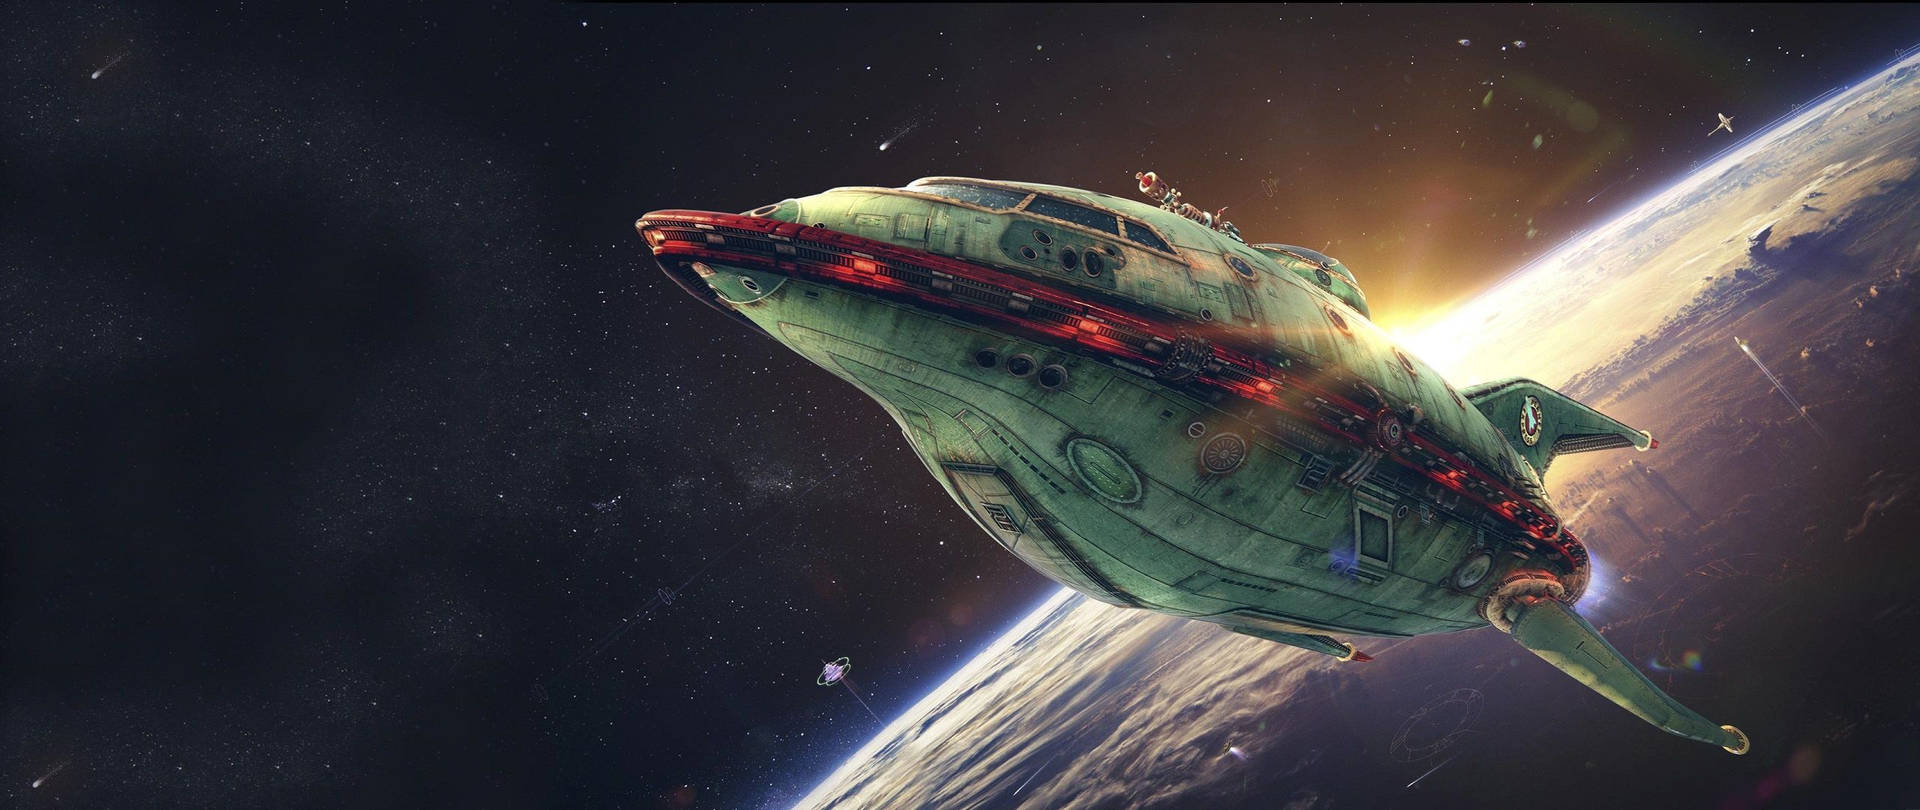 Green Spaceship In Outer Space wallpaper.